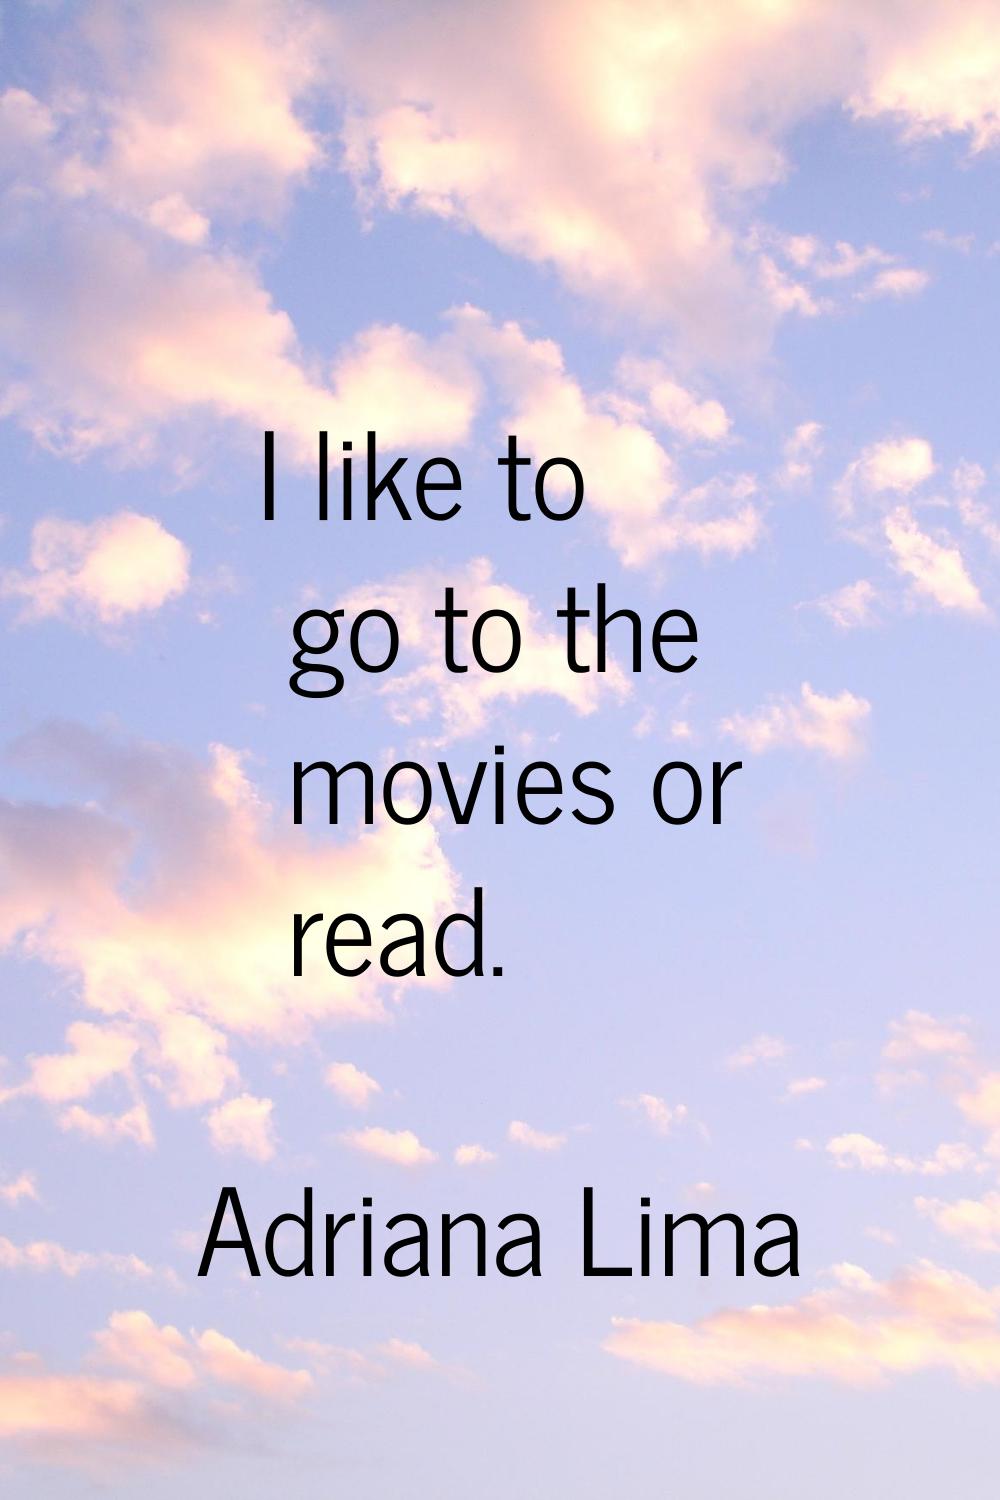 I like to go to the movies or read.